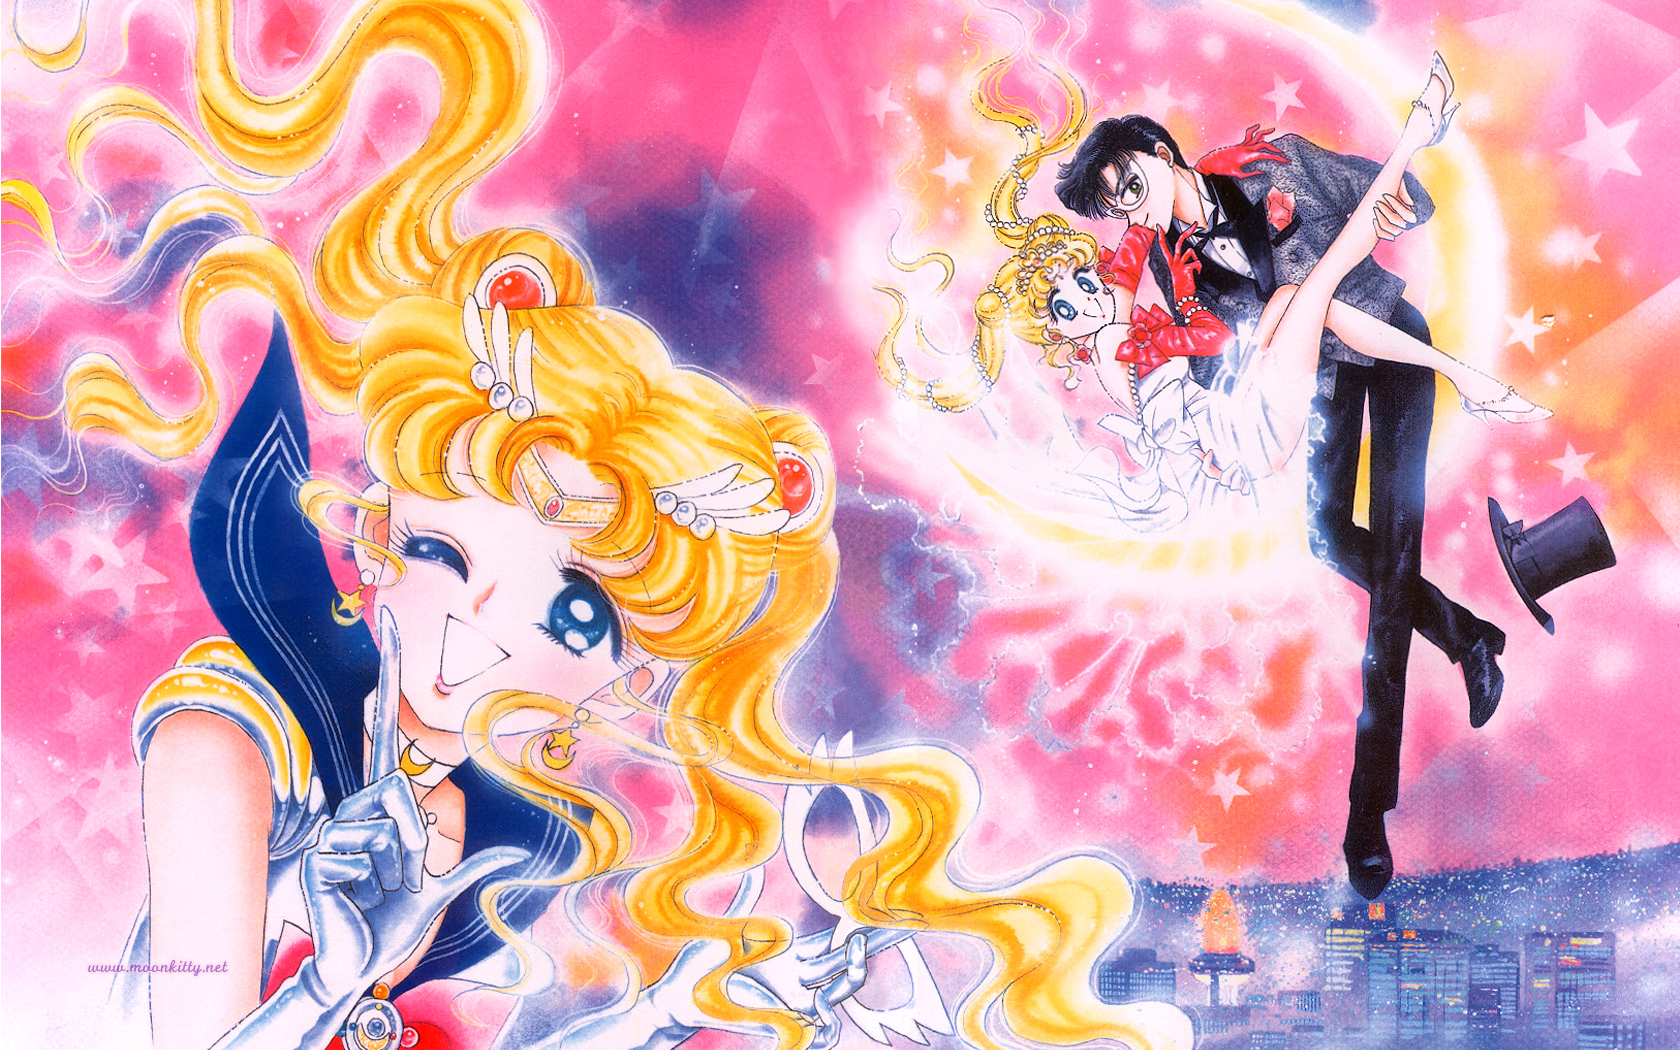 Superhero Sailor Moon Another Early Image Of Interesting